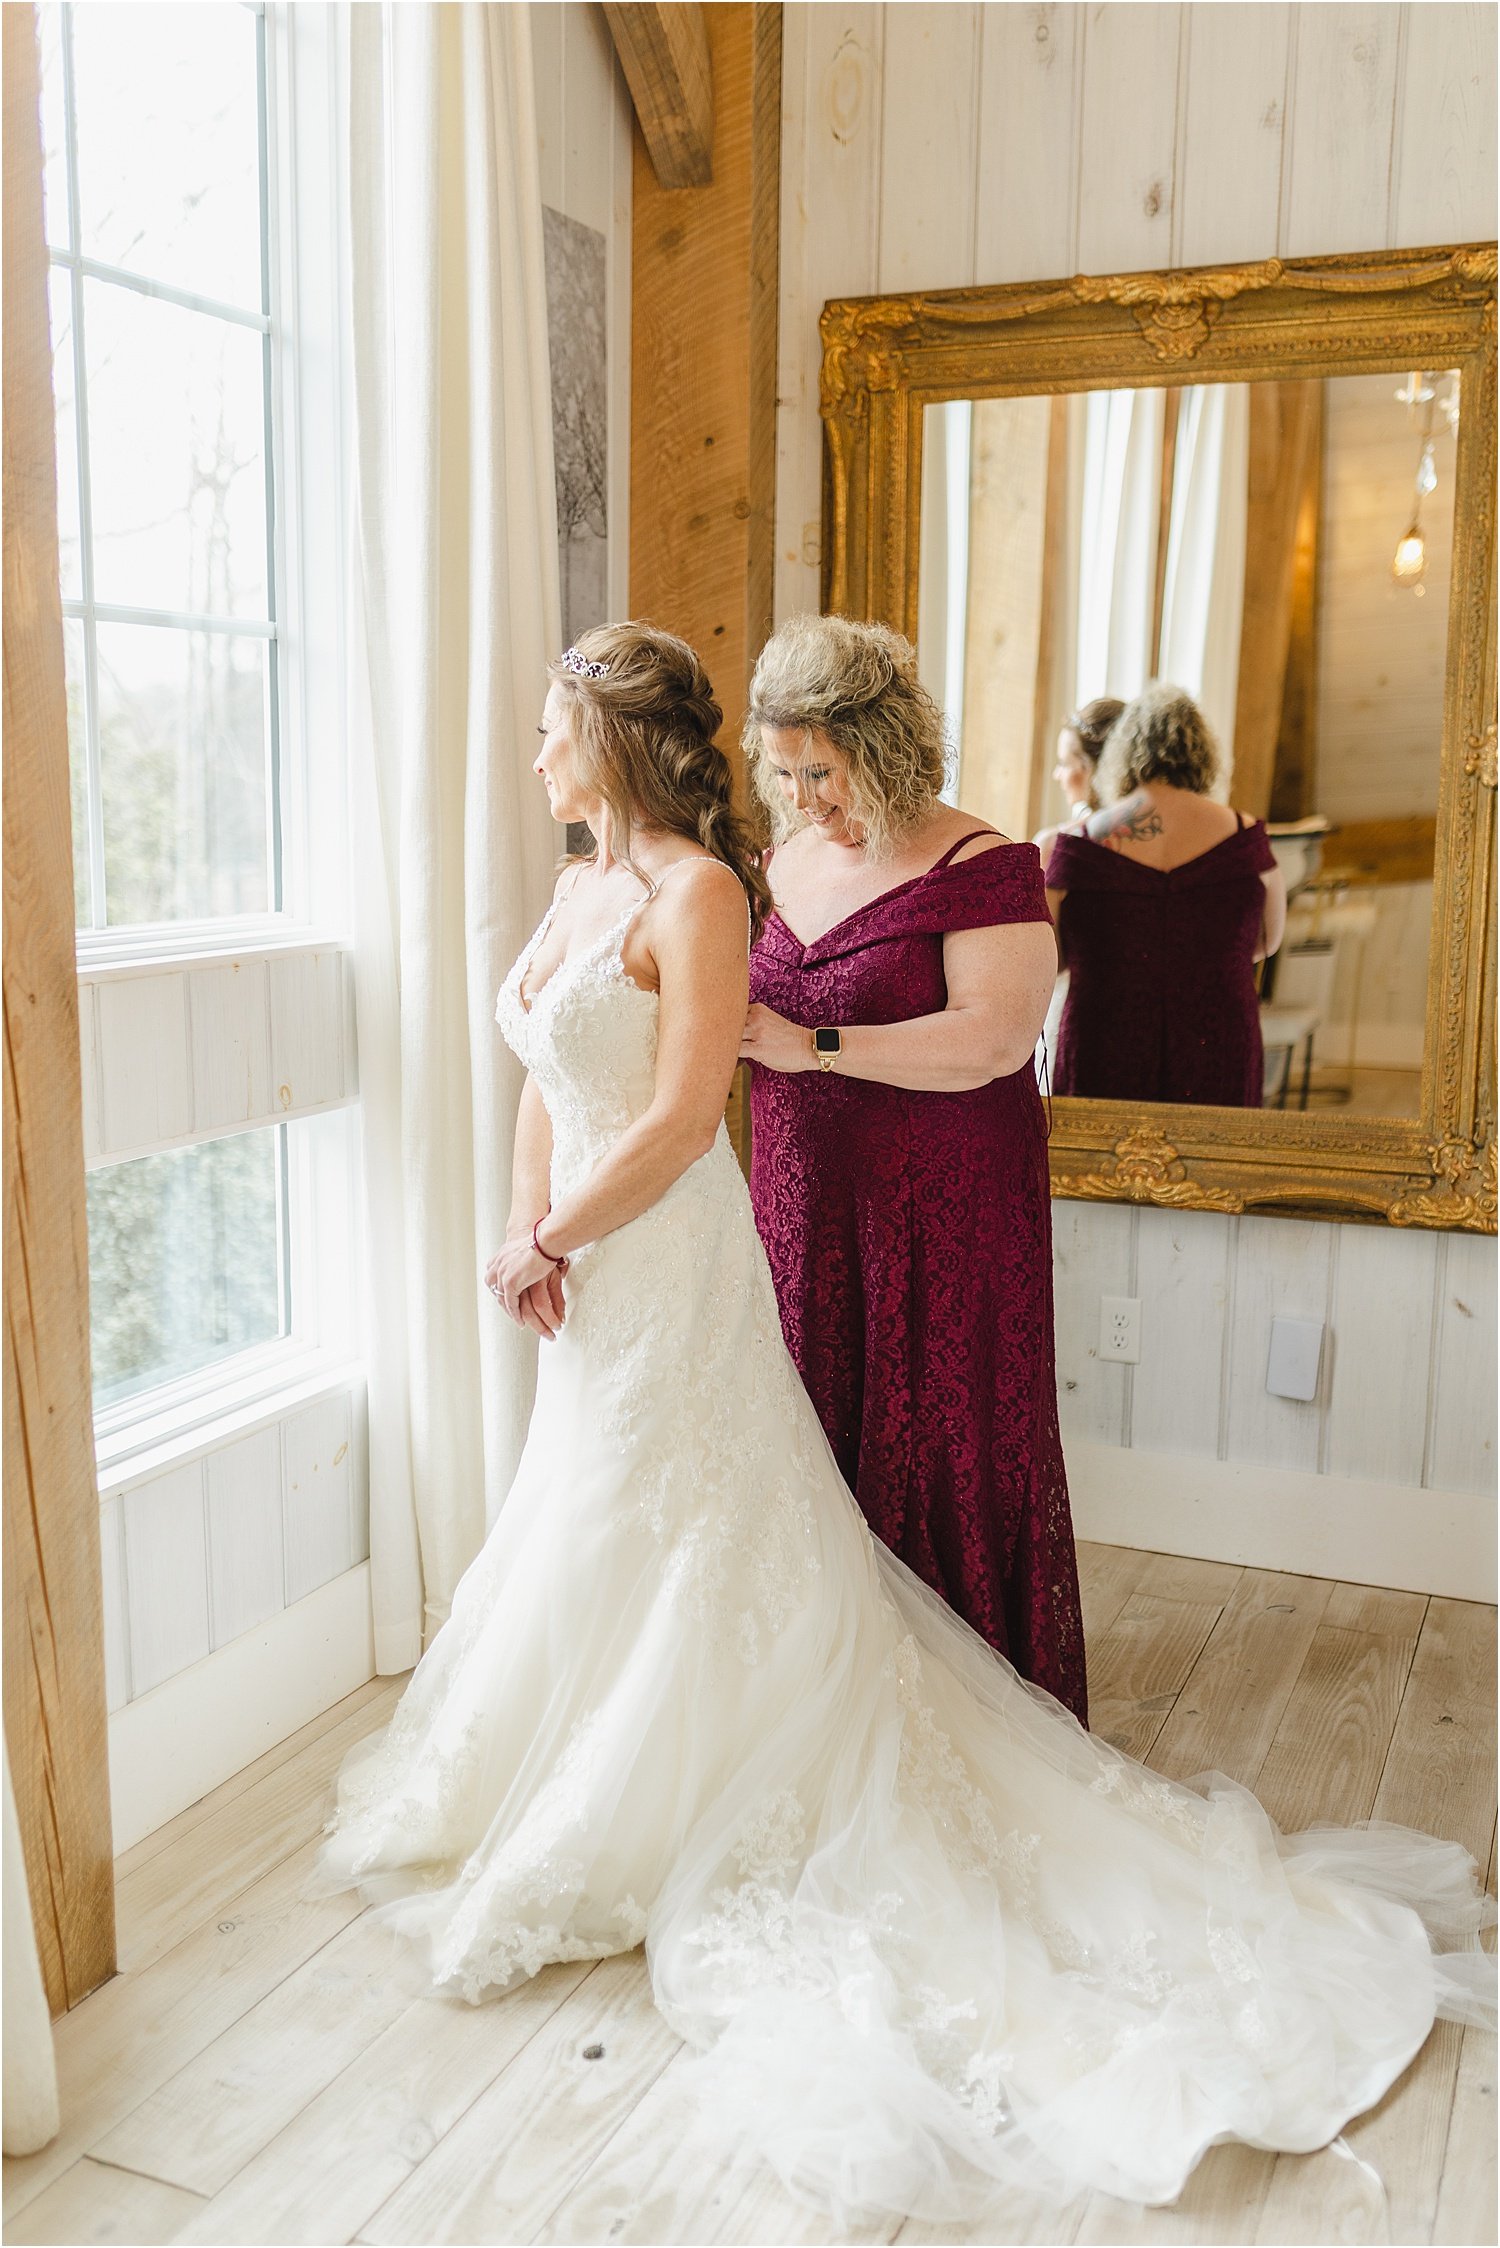 Maid of Honor Helping Bride Get Into Wedding Dress